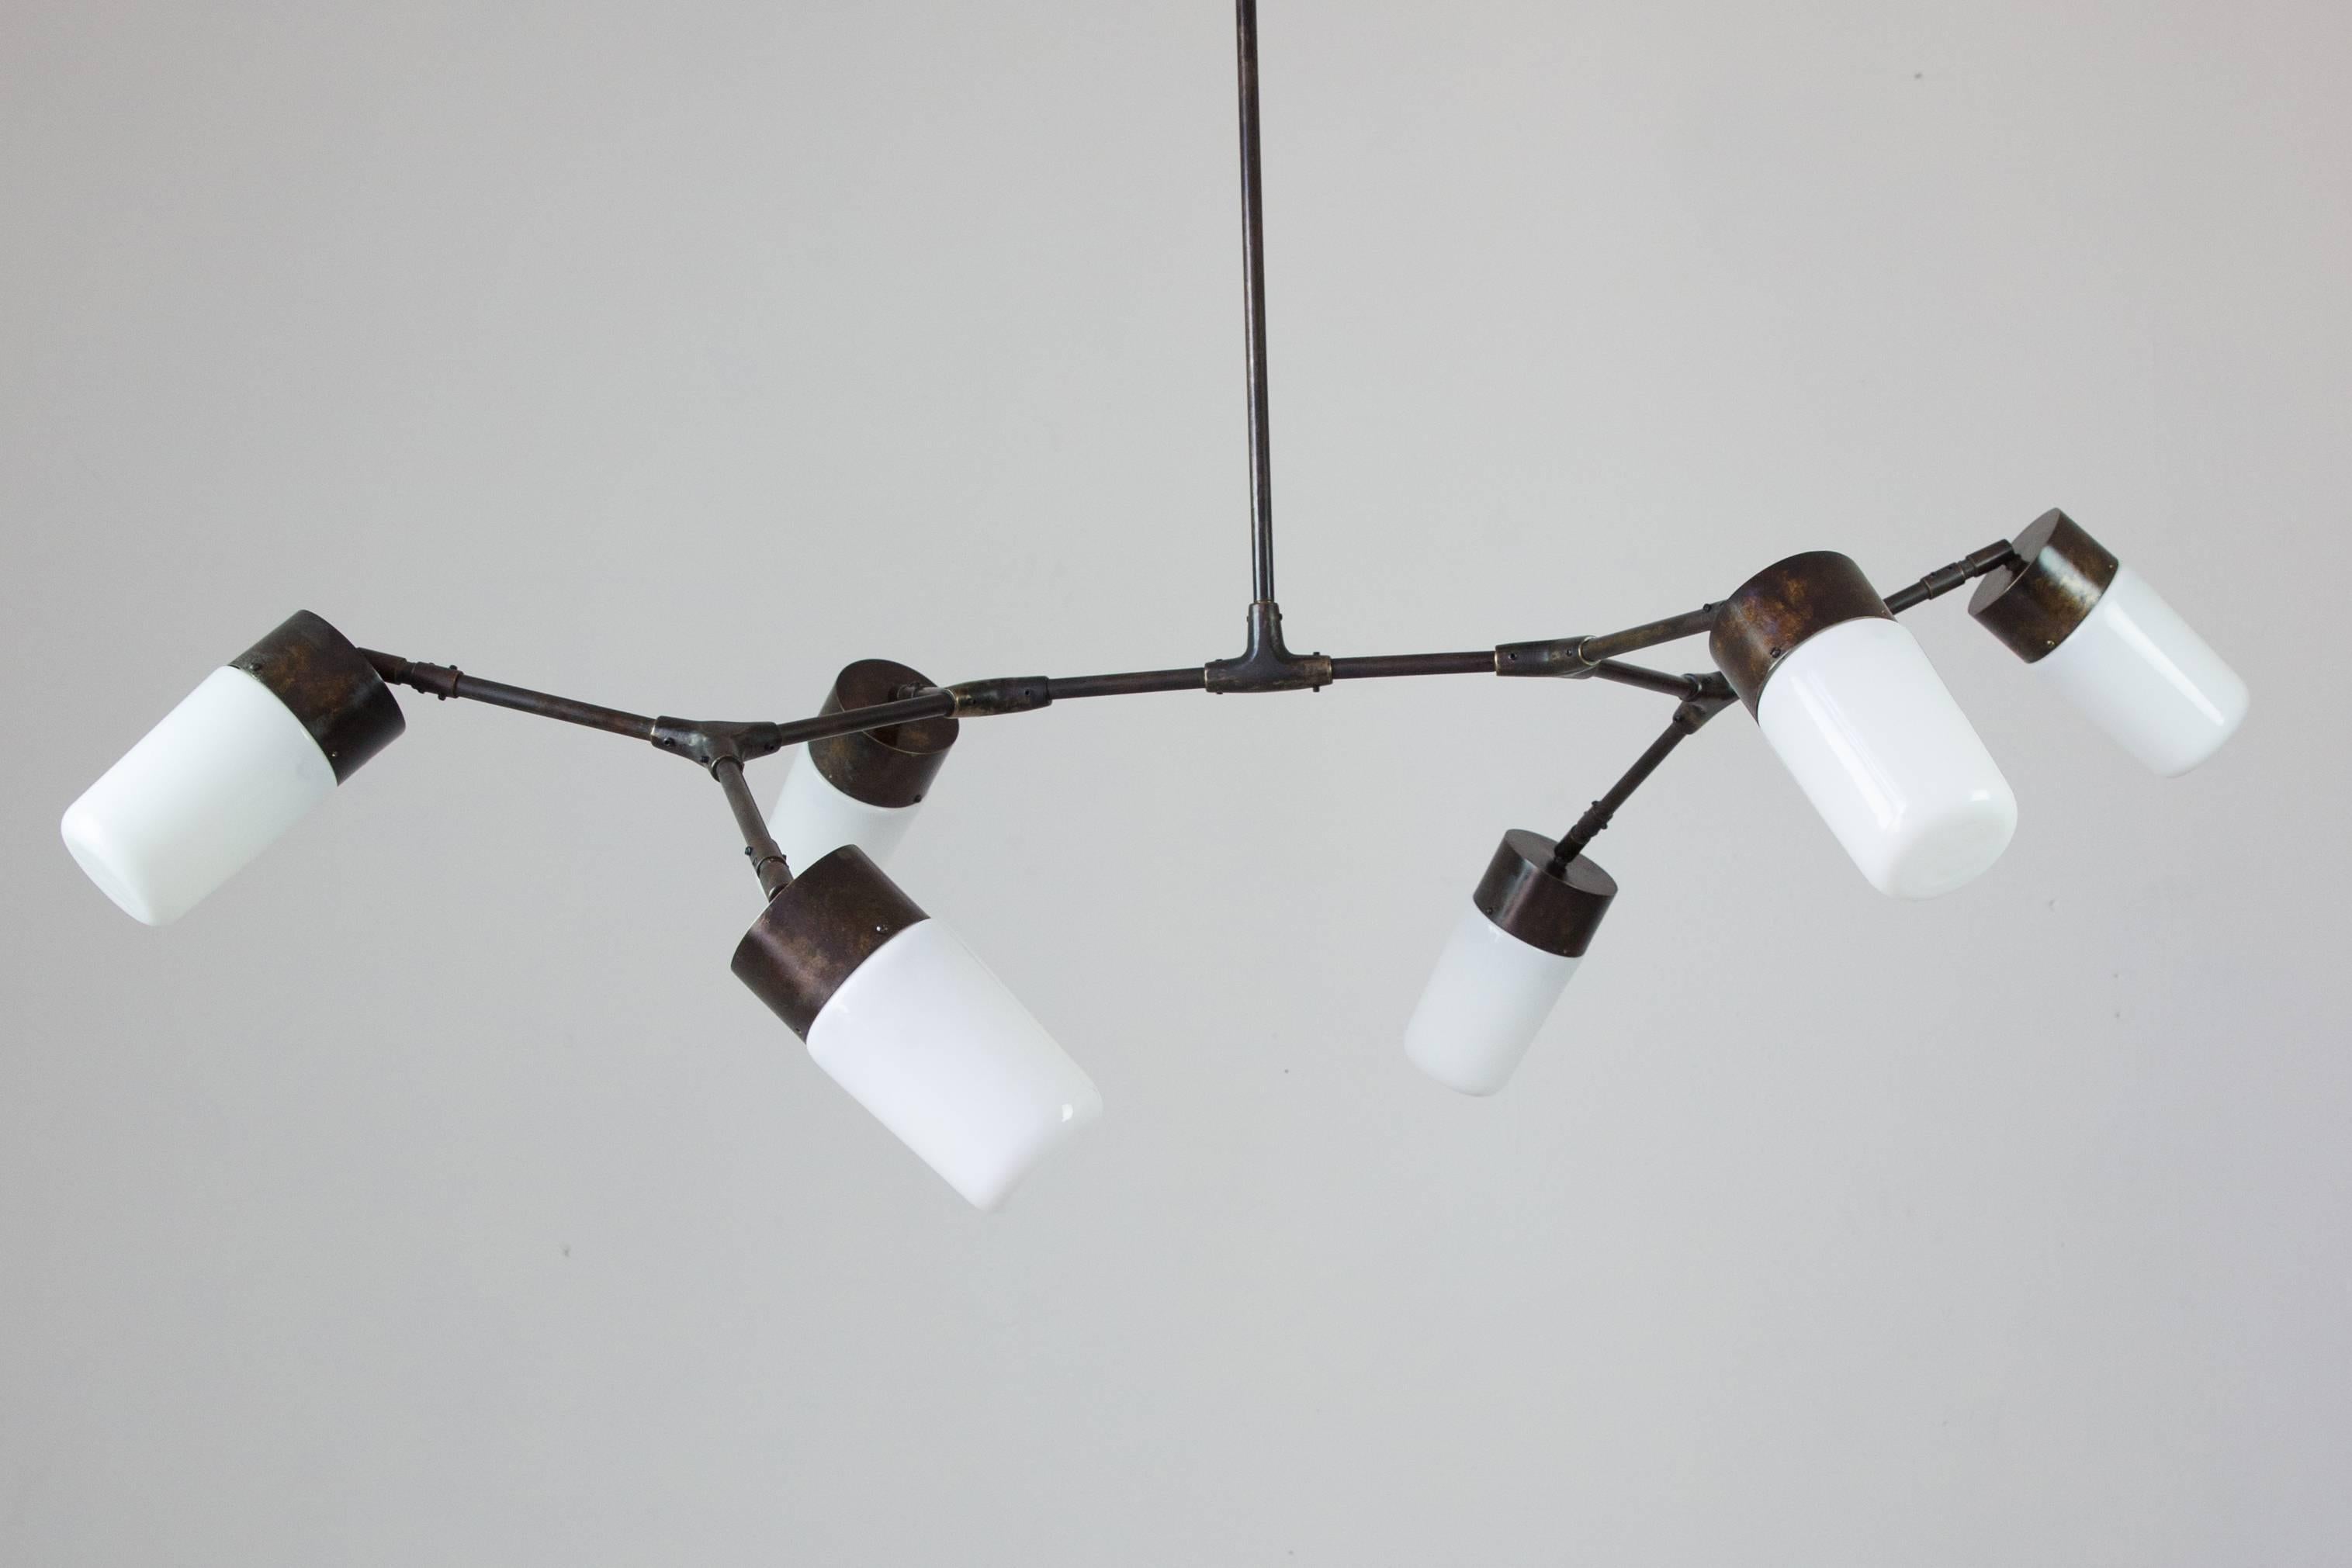 Design inspired by both organic and geometric patterns, using traditional metalworking techniques such as cast bronze and handmade brass parts.
With bronze connections handcrafted by artisans, this horizontal pendant lamp has six shades made of